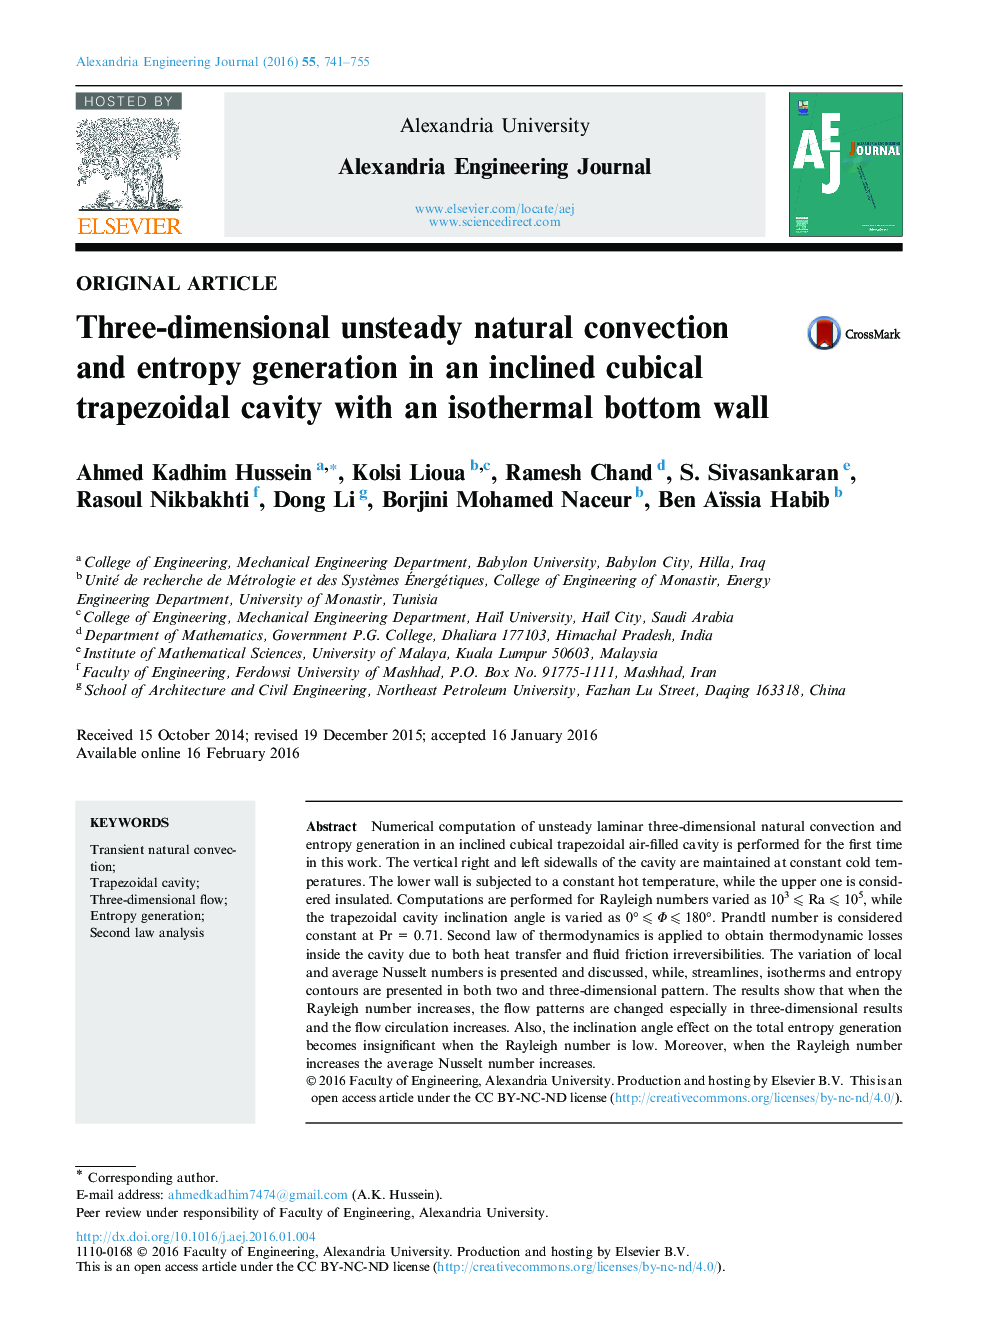 Three-dimensional unsteady natural convection and entropy generation in an inclined cubical trapezoidal cavity with an isothermal bottom wall 